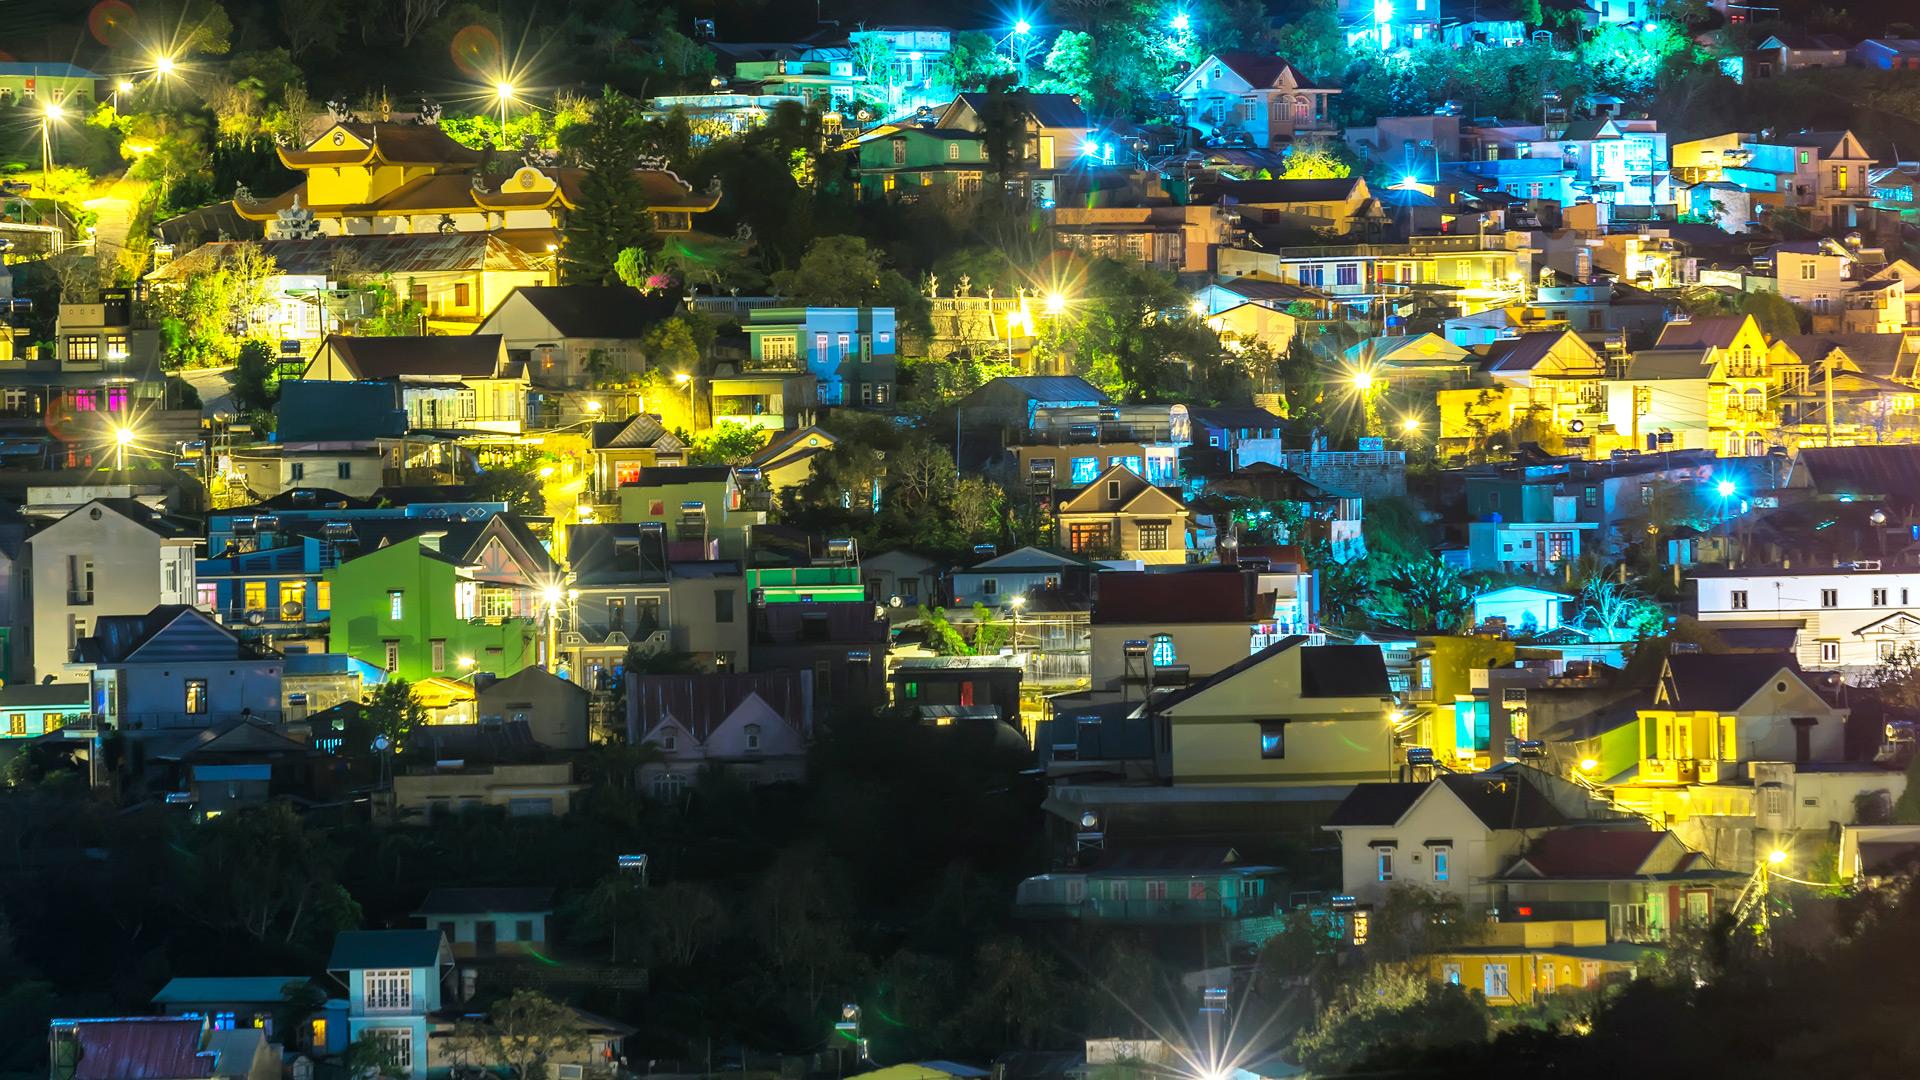 Neighborhood on a hill with lights on at night